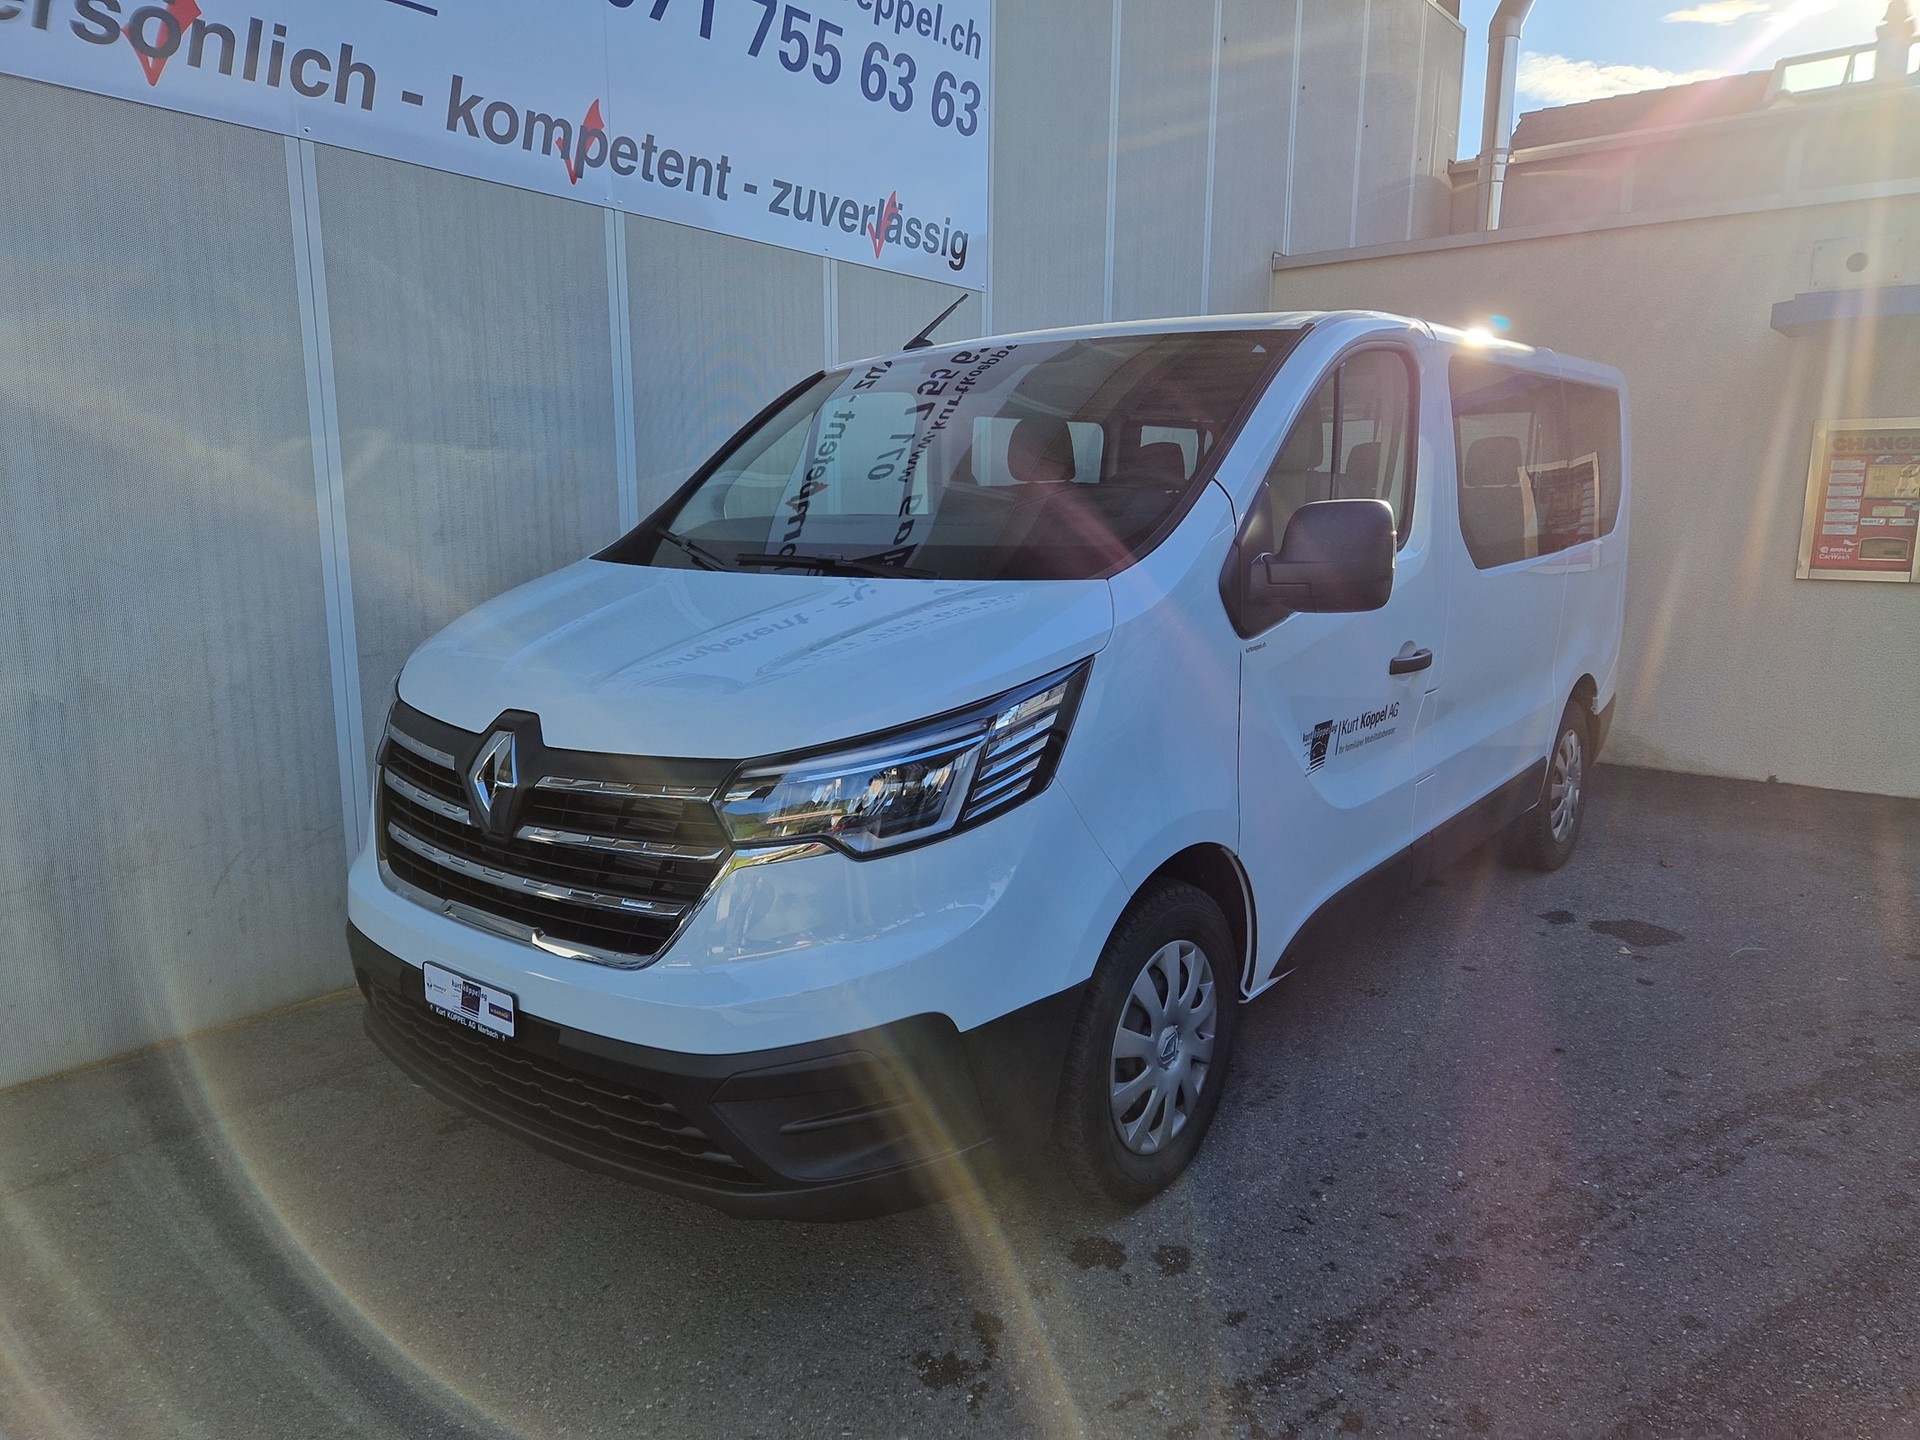 RENAULT Trafic Passenger 2.0 dCi Blue 110 equilibre Occasion 37